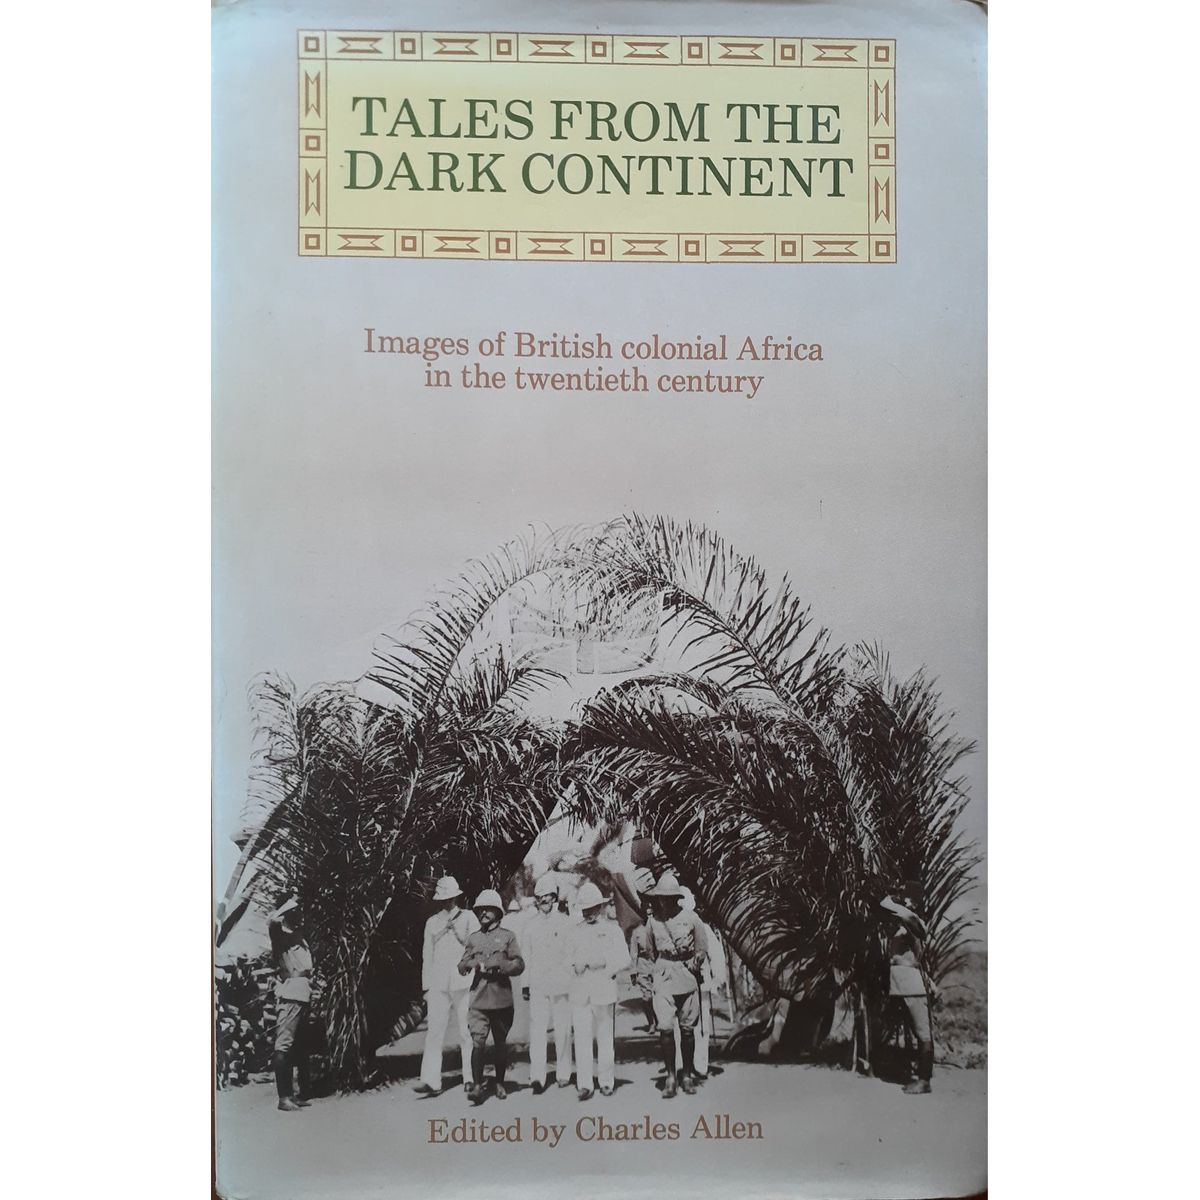 ISBN: 9780233971711 / 0233971718 - Tales from the Dark Continent: Images of British Colonial Africa in the Twentieth Century by Charles Allen [1979]